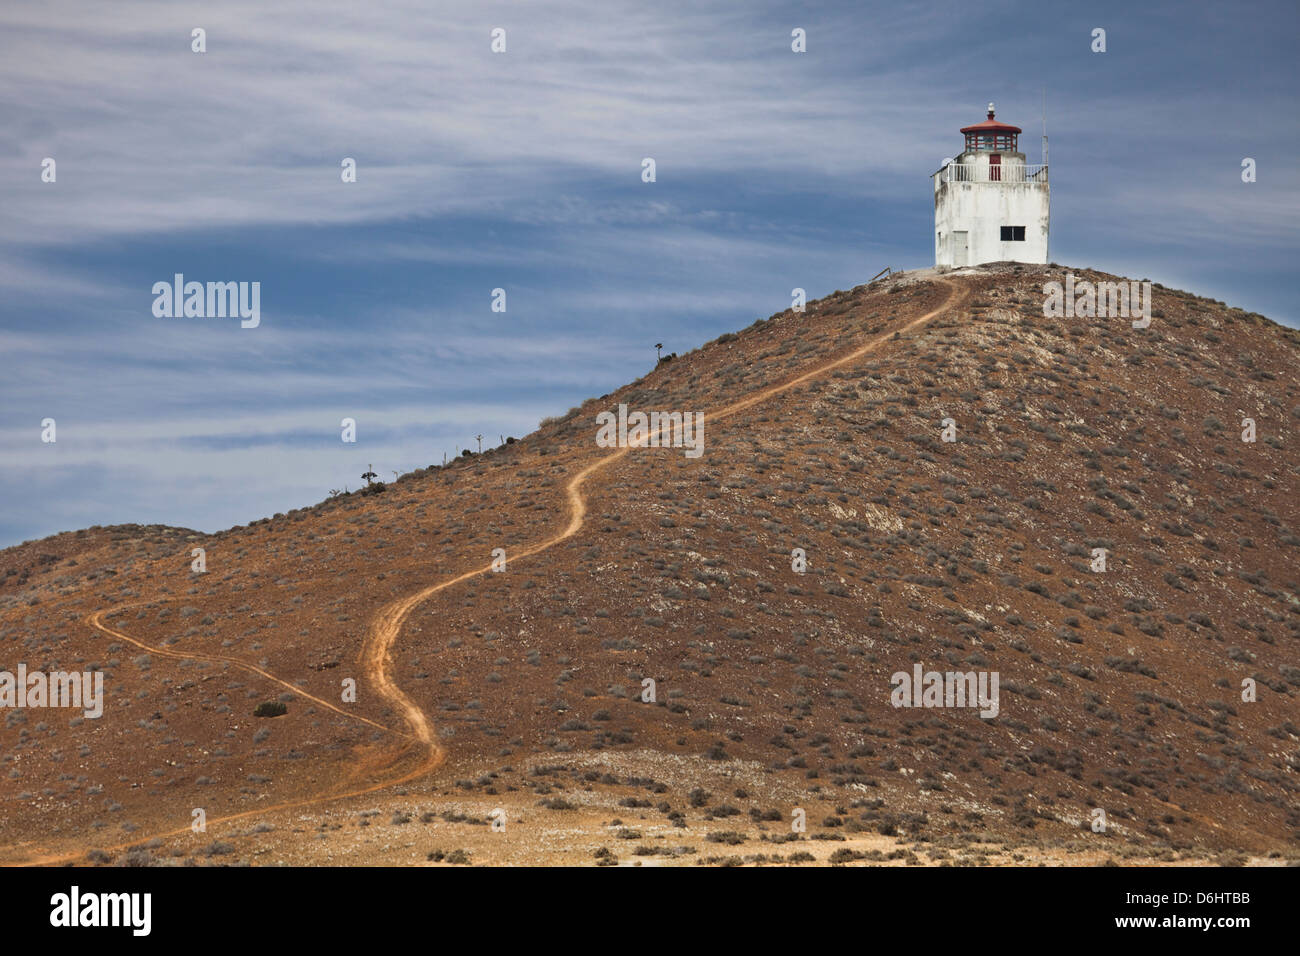 A path leads up a hill to the currently used lighthouse on Isla San Benito Oeste, Baja California Norte, Mexico Stock Photo